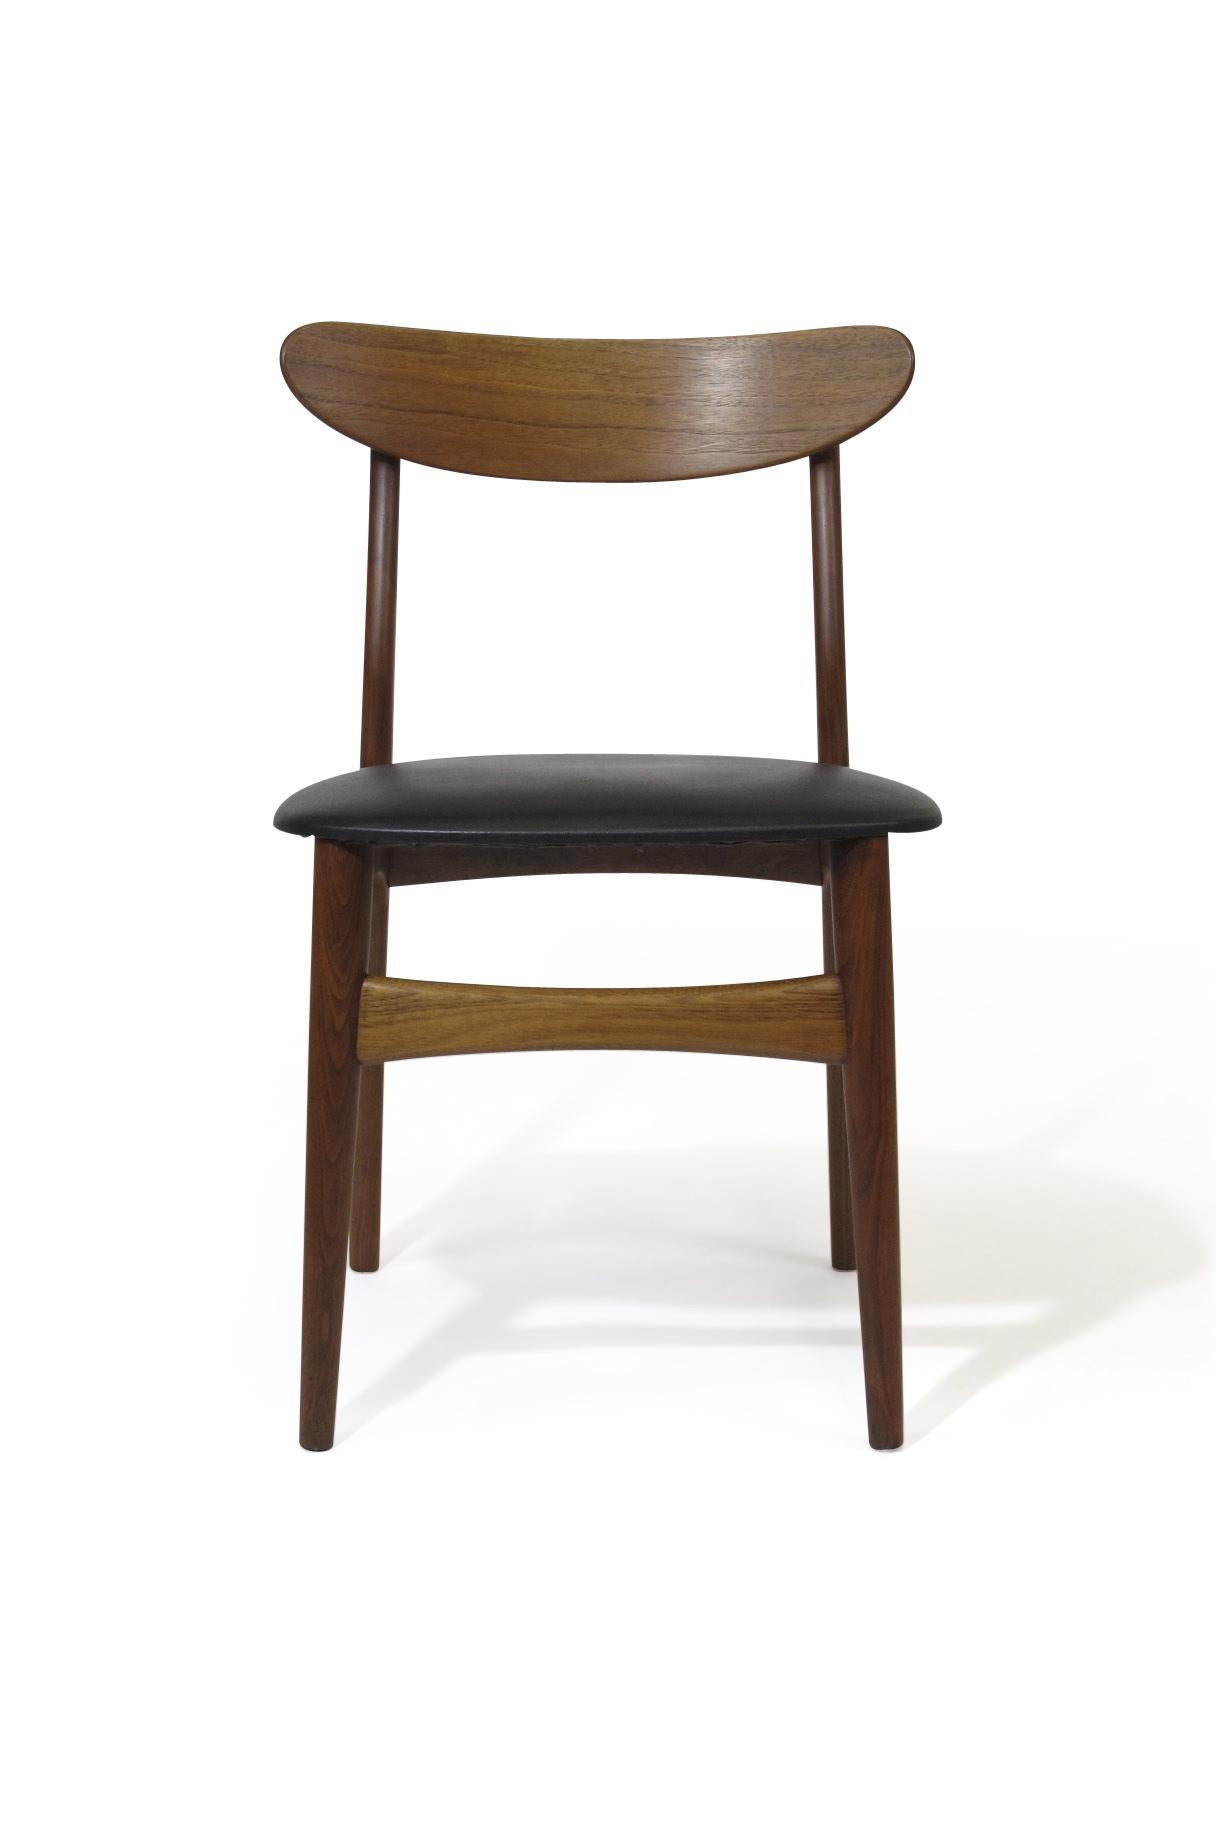 Four Danish midcentury dining chairs crafted of walnut with original black vinyl upholstered seats. Professionally restored and in excellent condition with minor signs of age used. Custom upholstery options available upon request.